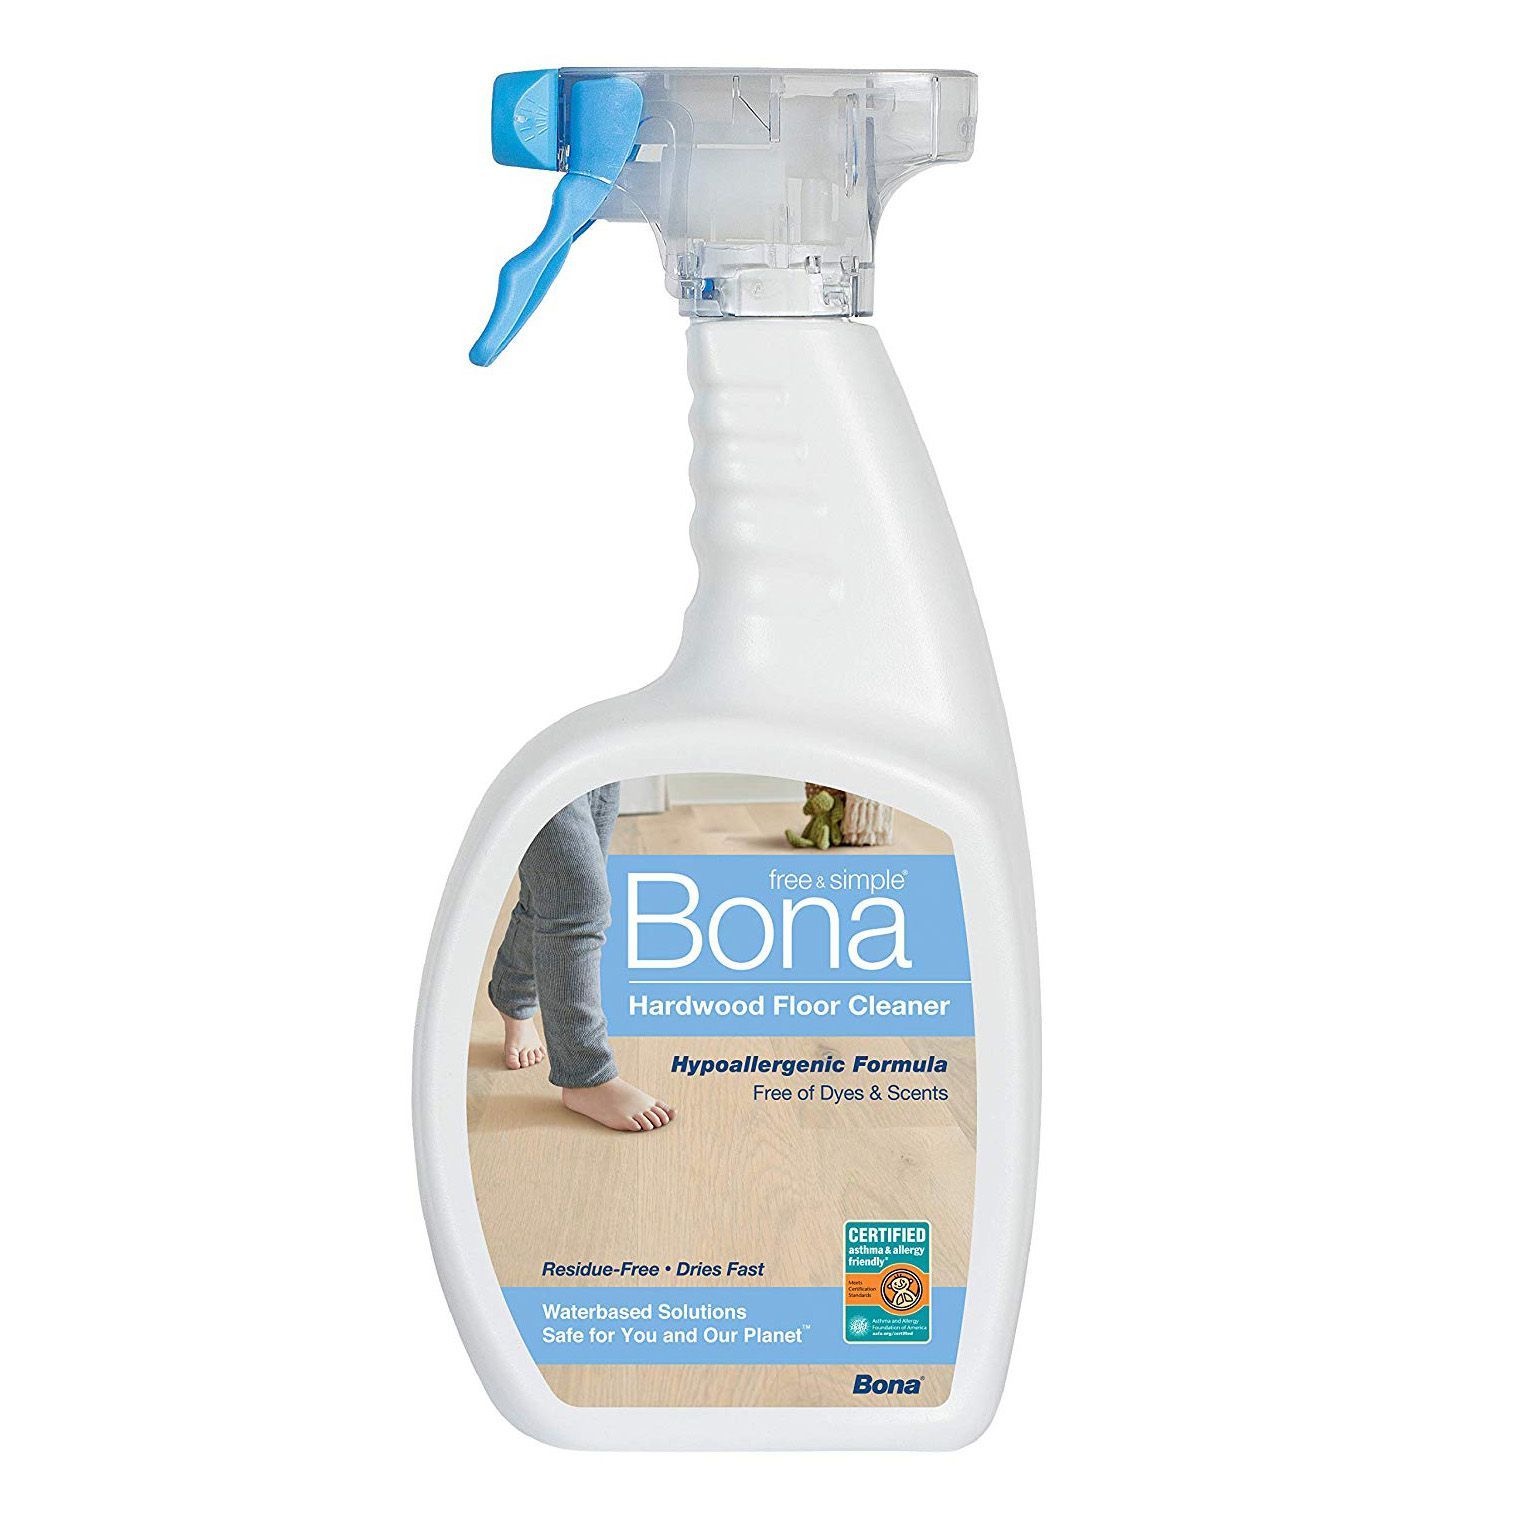 10 Best Wood Floor Cleaners Top Rated, Bona Hardwood Floor Cleaner Concentrated Formula